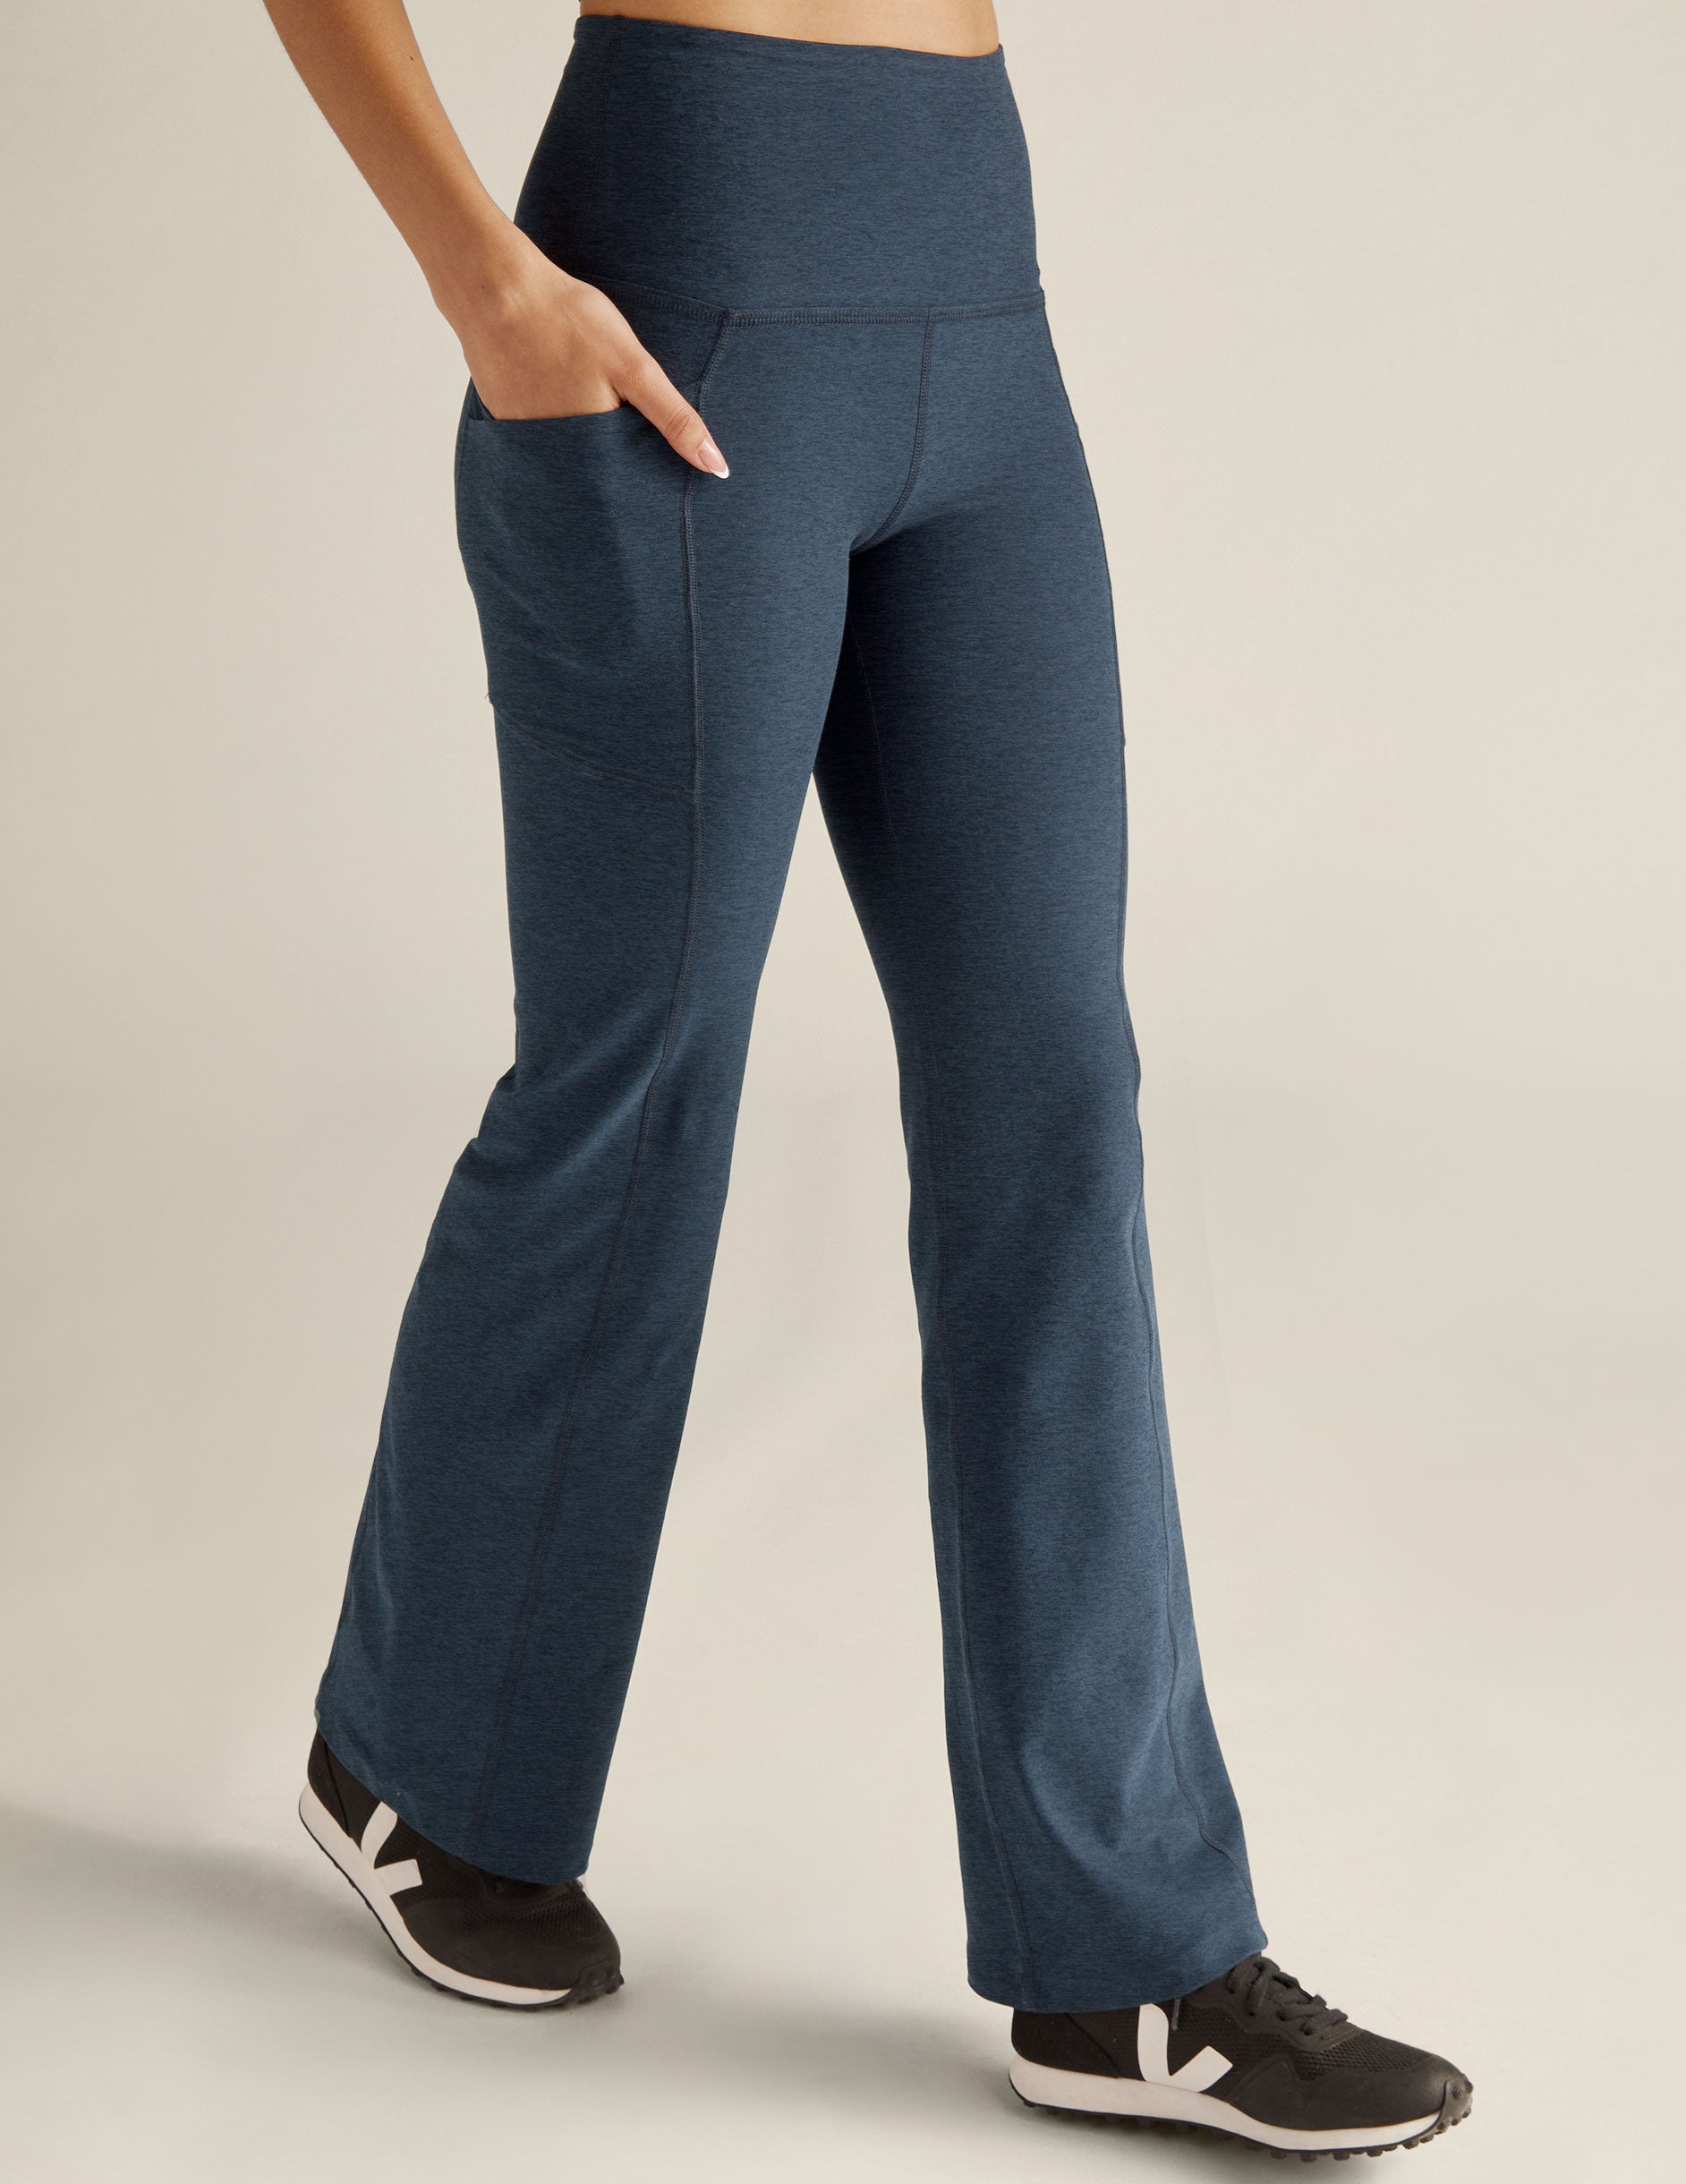 First time trying Groove pants in store today! Details in comments